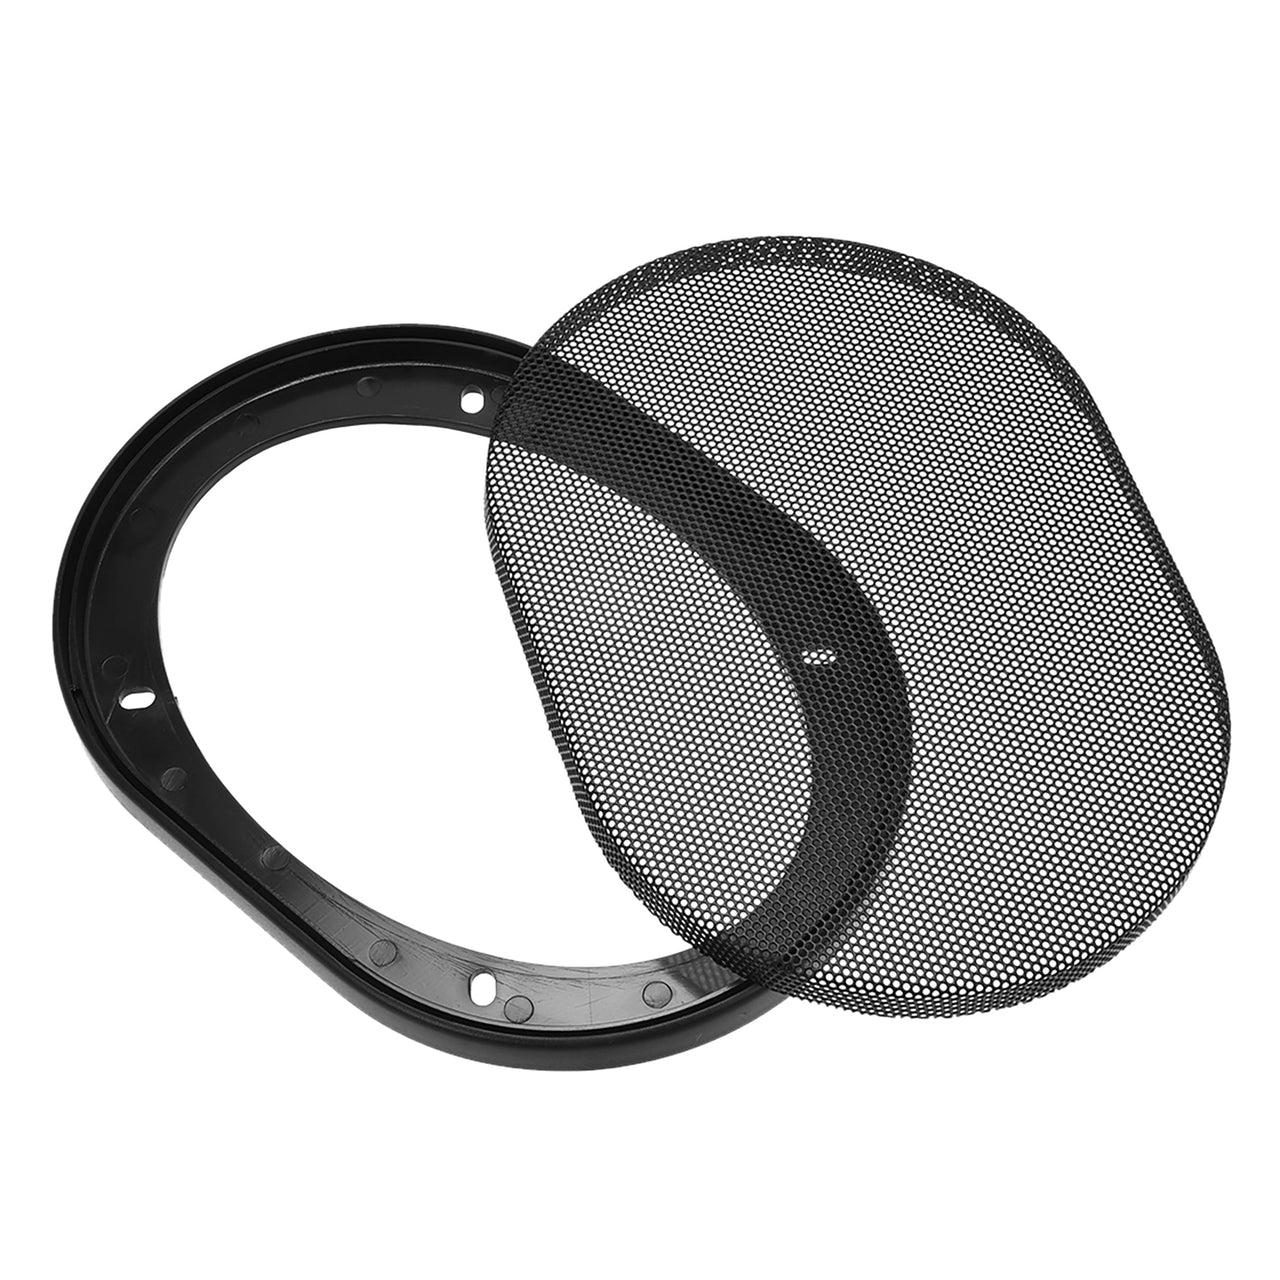 2 Absolute USA CS68 <BR/>universal 6x8" speaker coaxial component protective grills cover